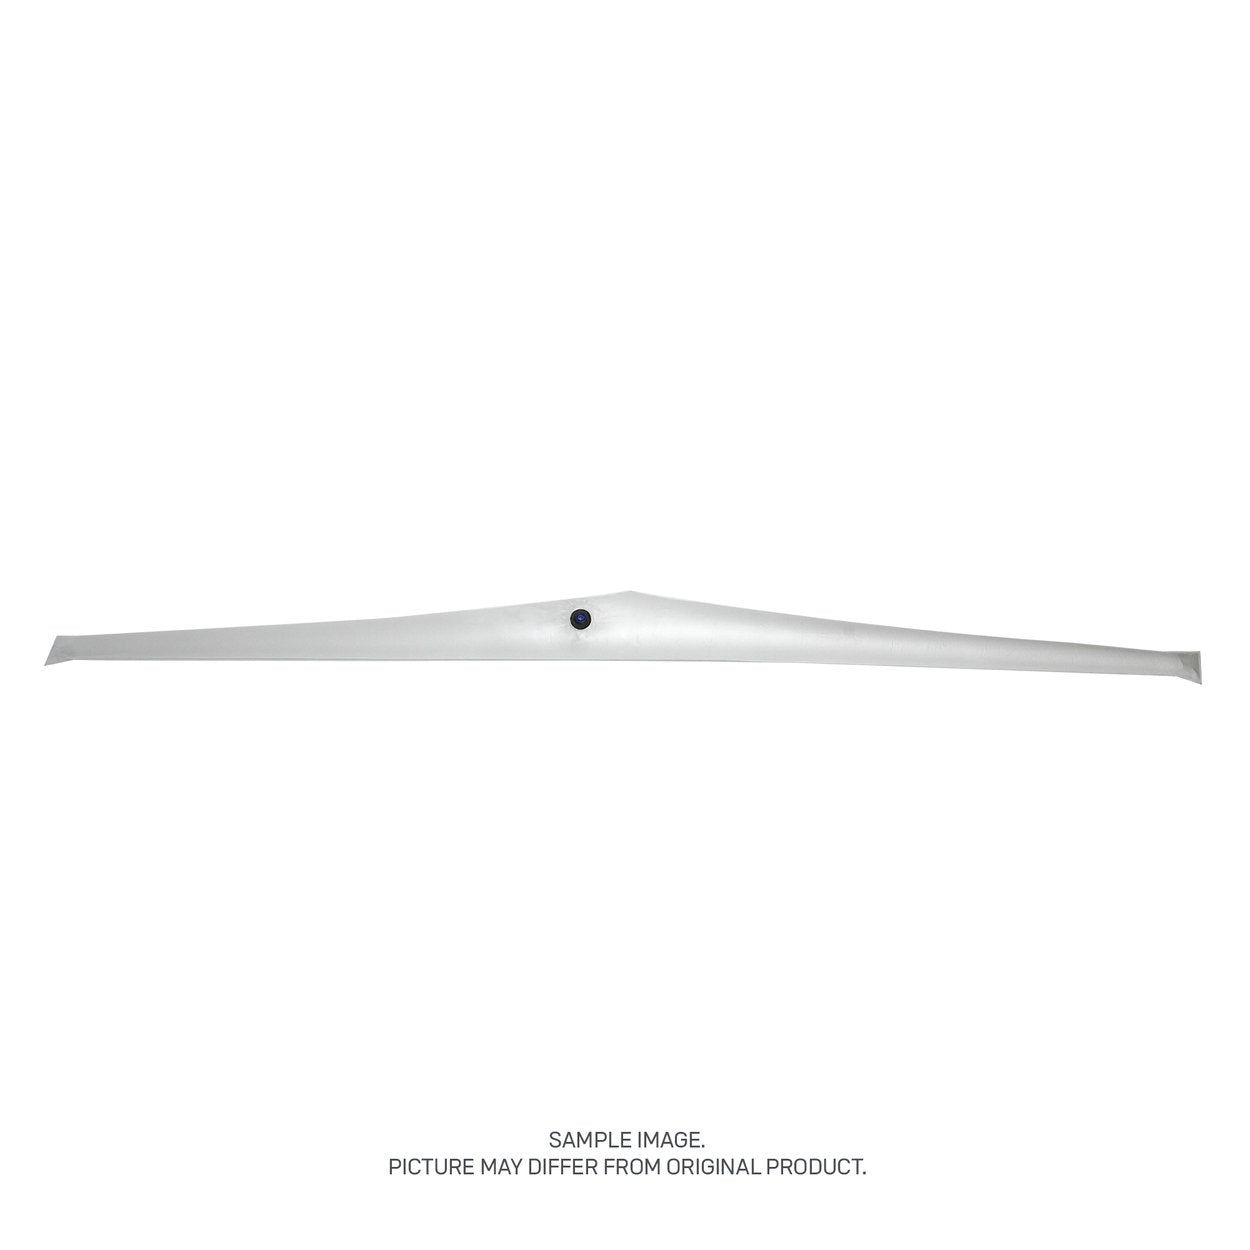 Duotone Foil Wing Slick Front Tube Bladder (SS21) 2021 - Worthing Watersports - 9010583019642 - DT Spareparts - Duotone X